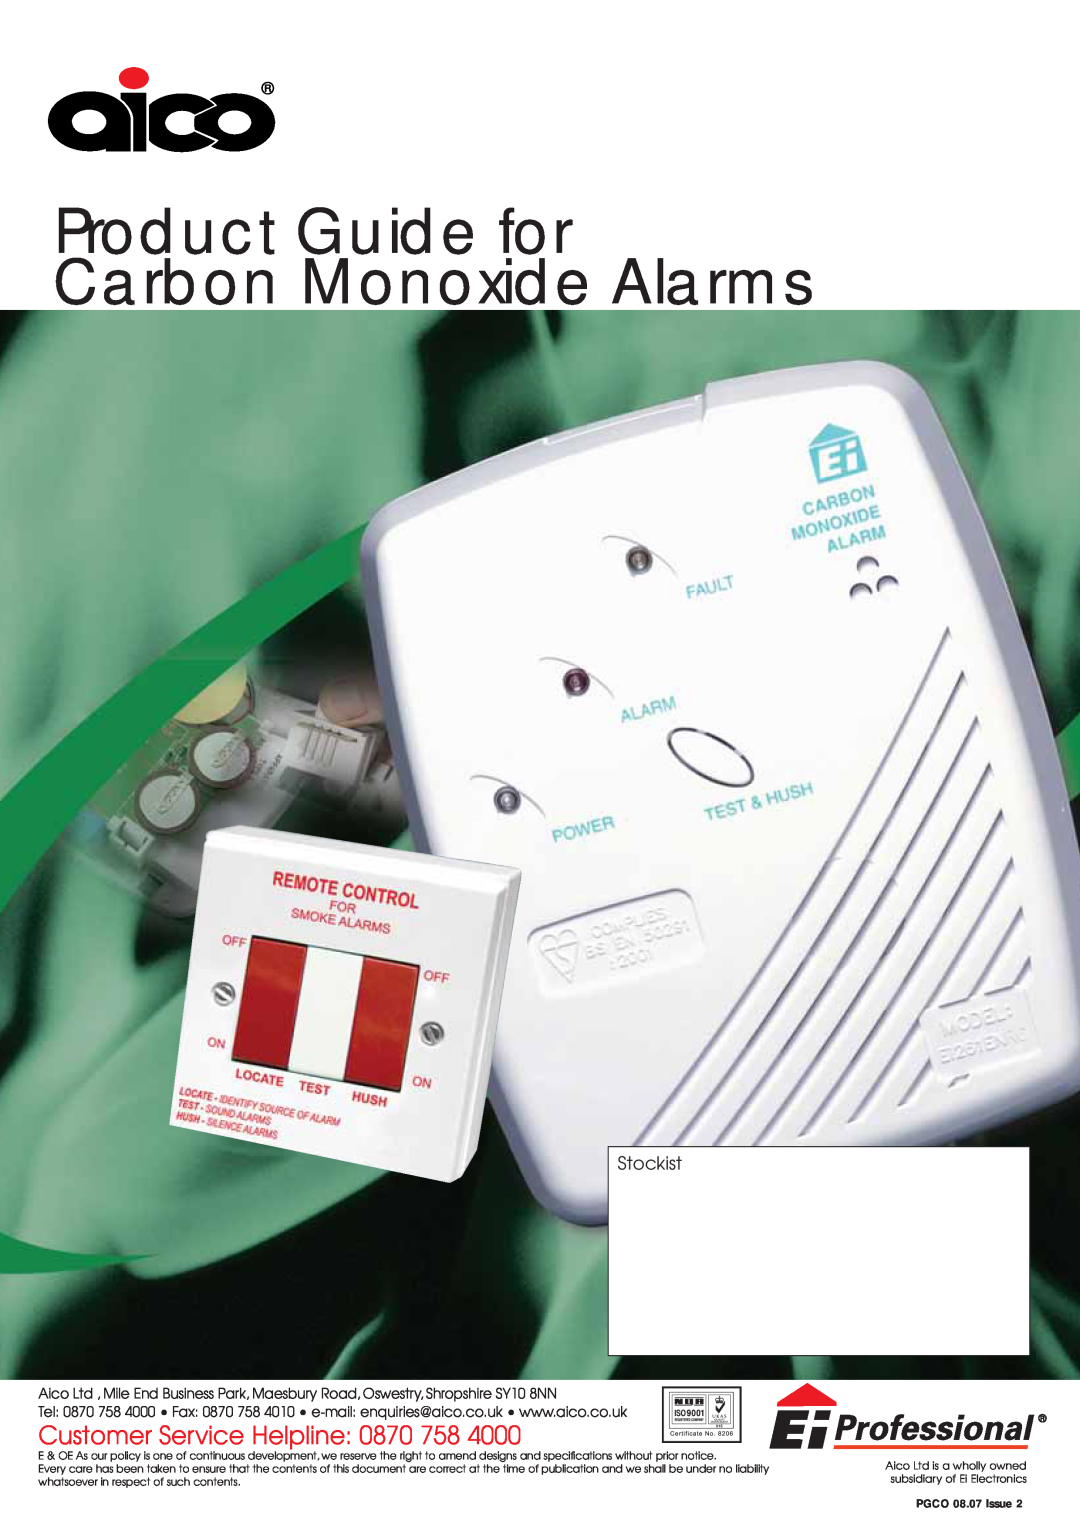 Aico 260 Series Product Guide for Carbon Monoxide Alarms, Customer Service Helpline 0870 758, Stockist, PGCO 08.07 Issue 